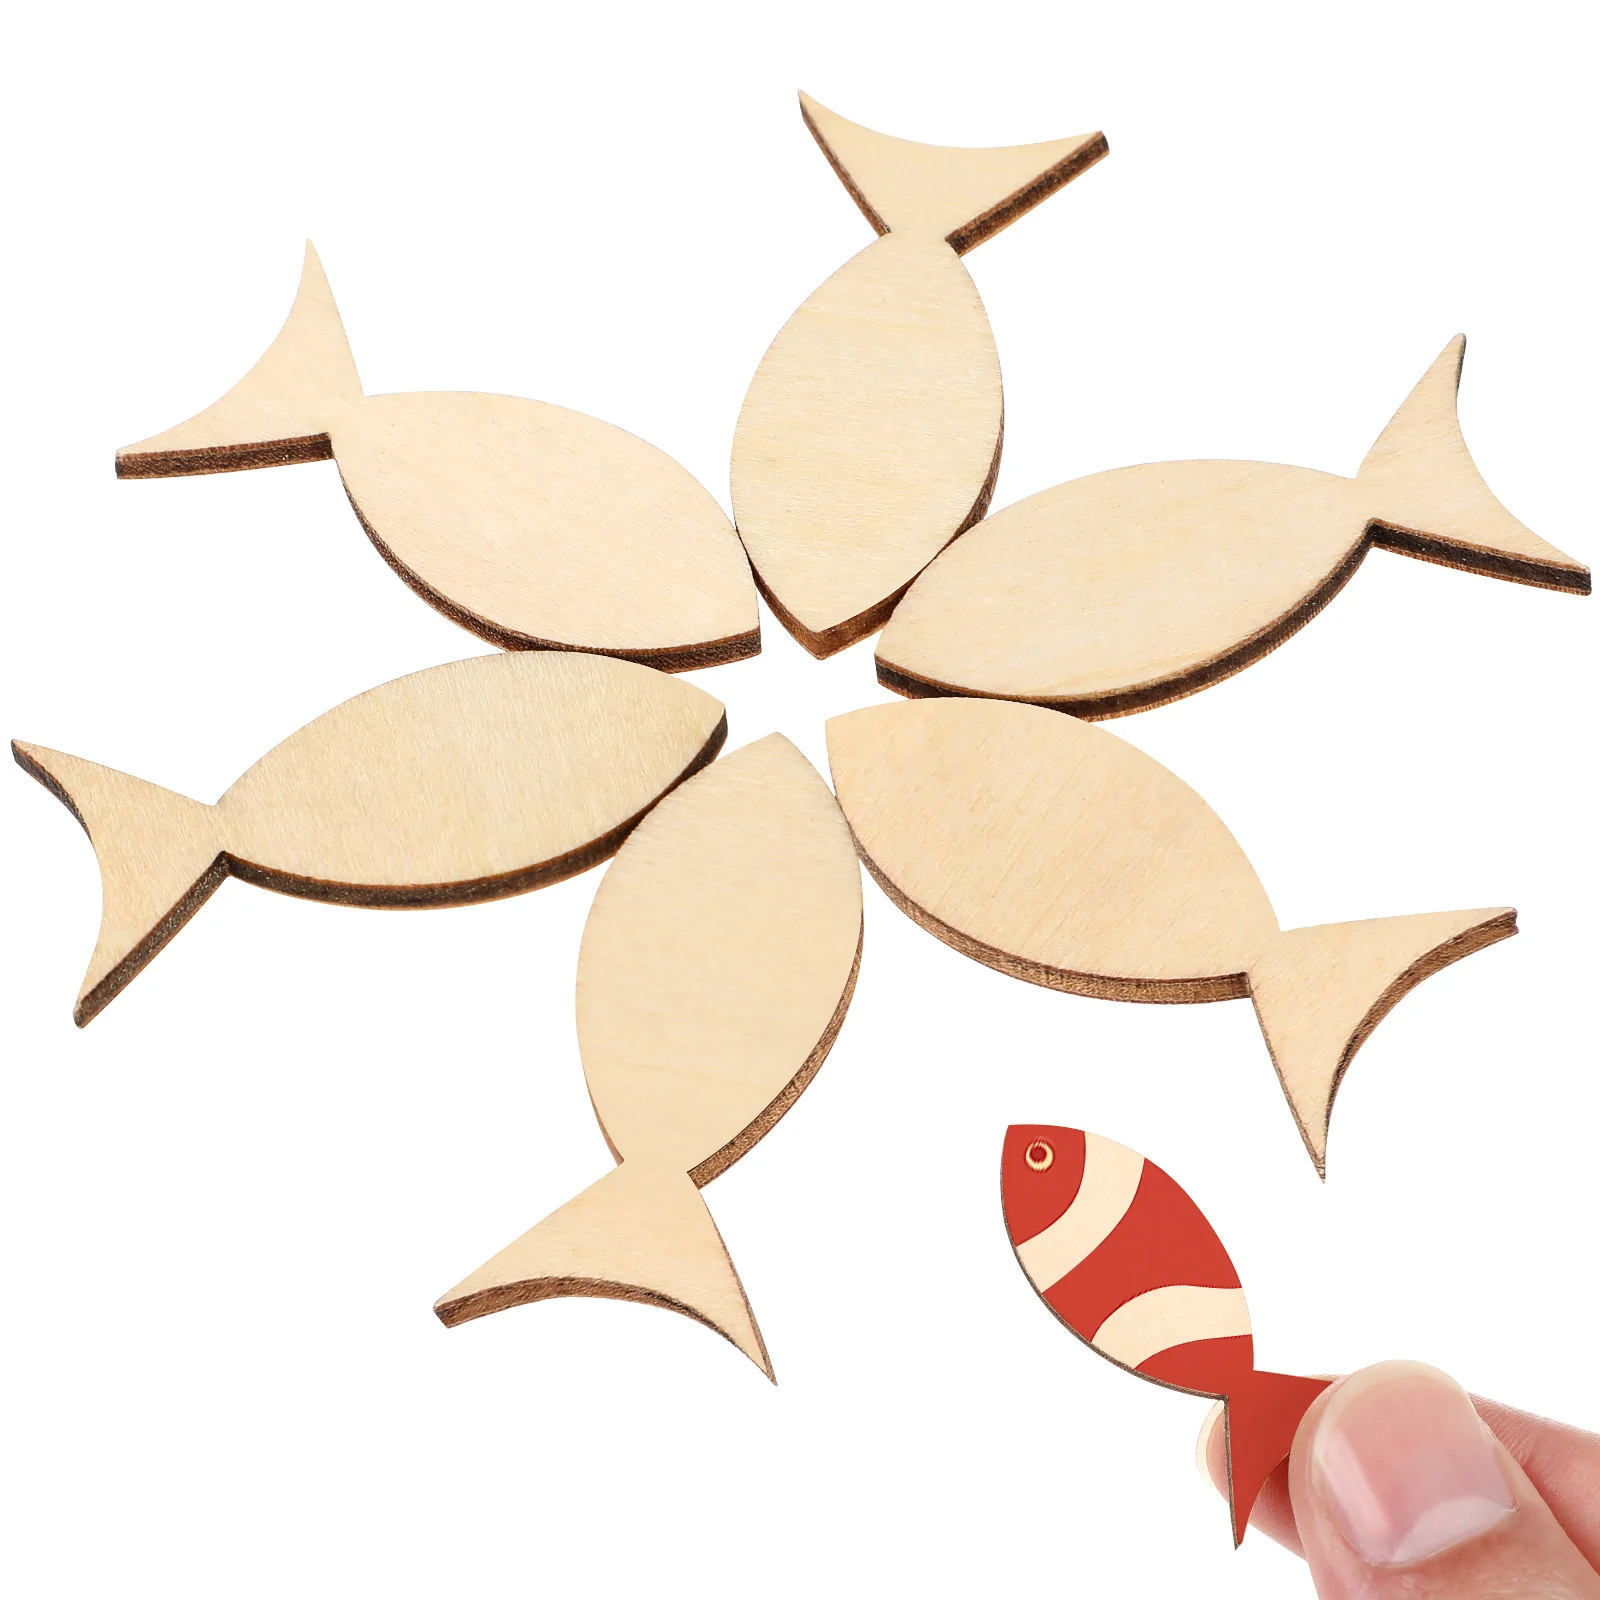 

100 Pcs Woodsy Decor Wooden Solid Fish Unfinished Slices Gift Tags Shapes Crafting Ship Ornaments Chip